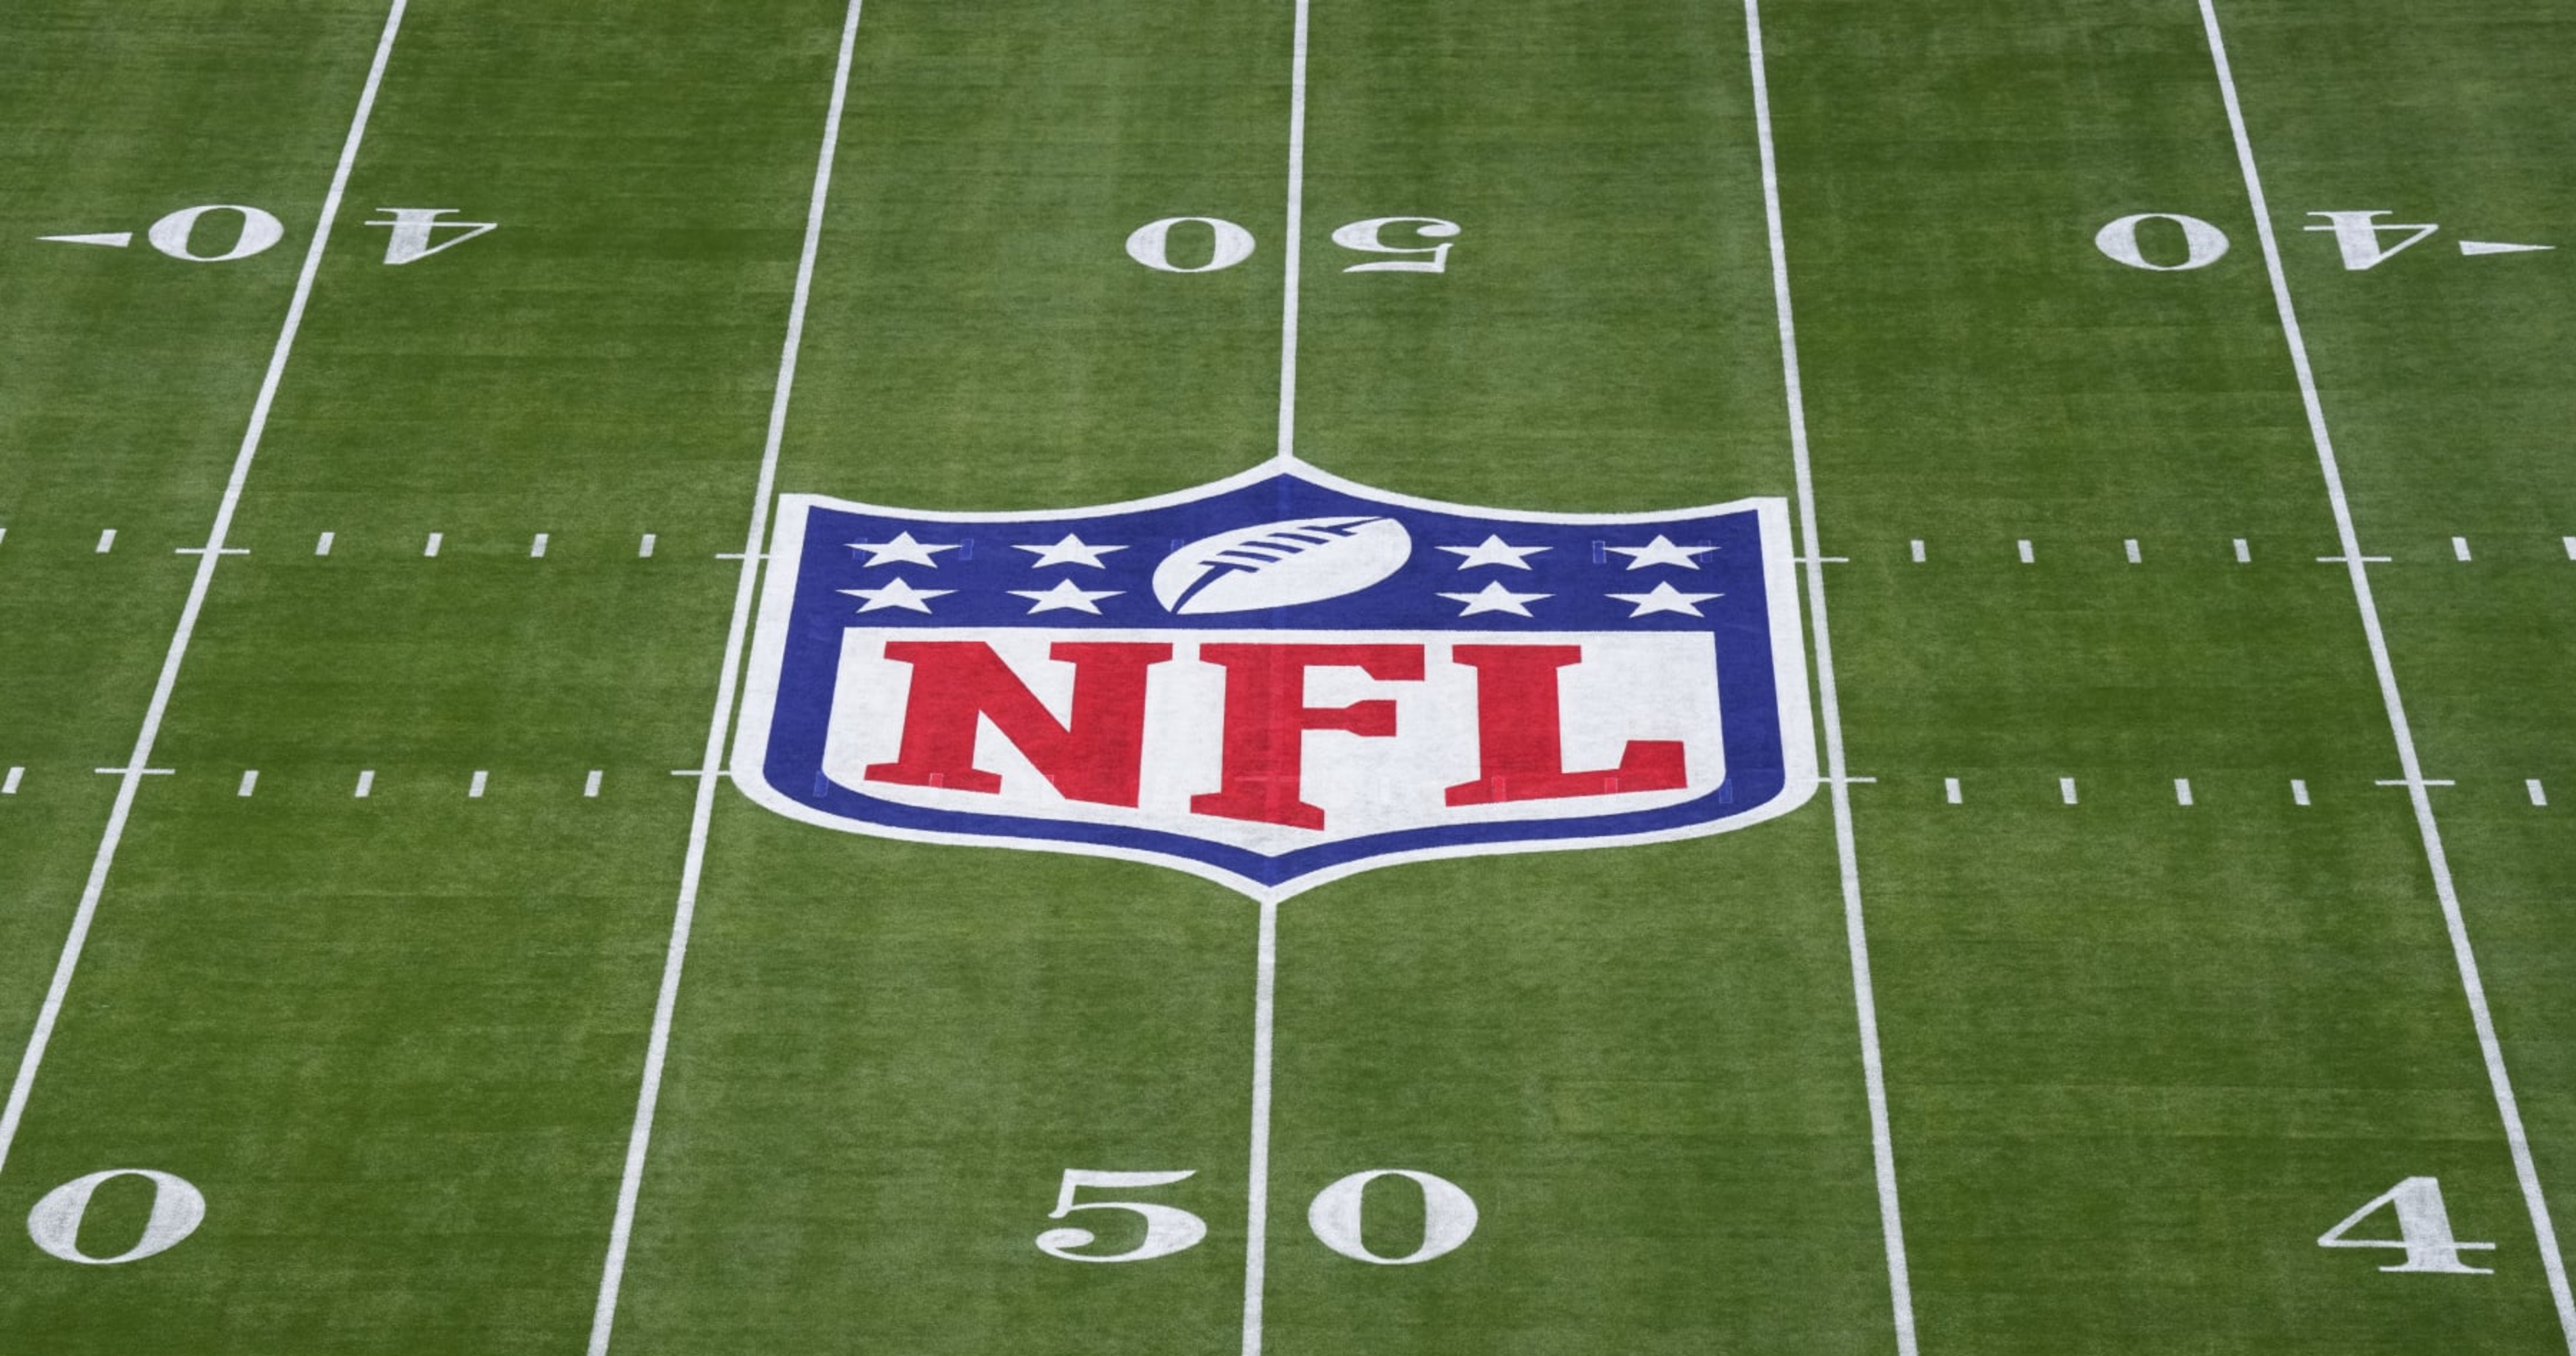 NFL Sunday Ticket' to Offer Unlimited Simultaneous At-Home Streams